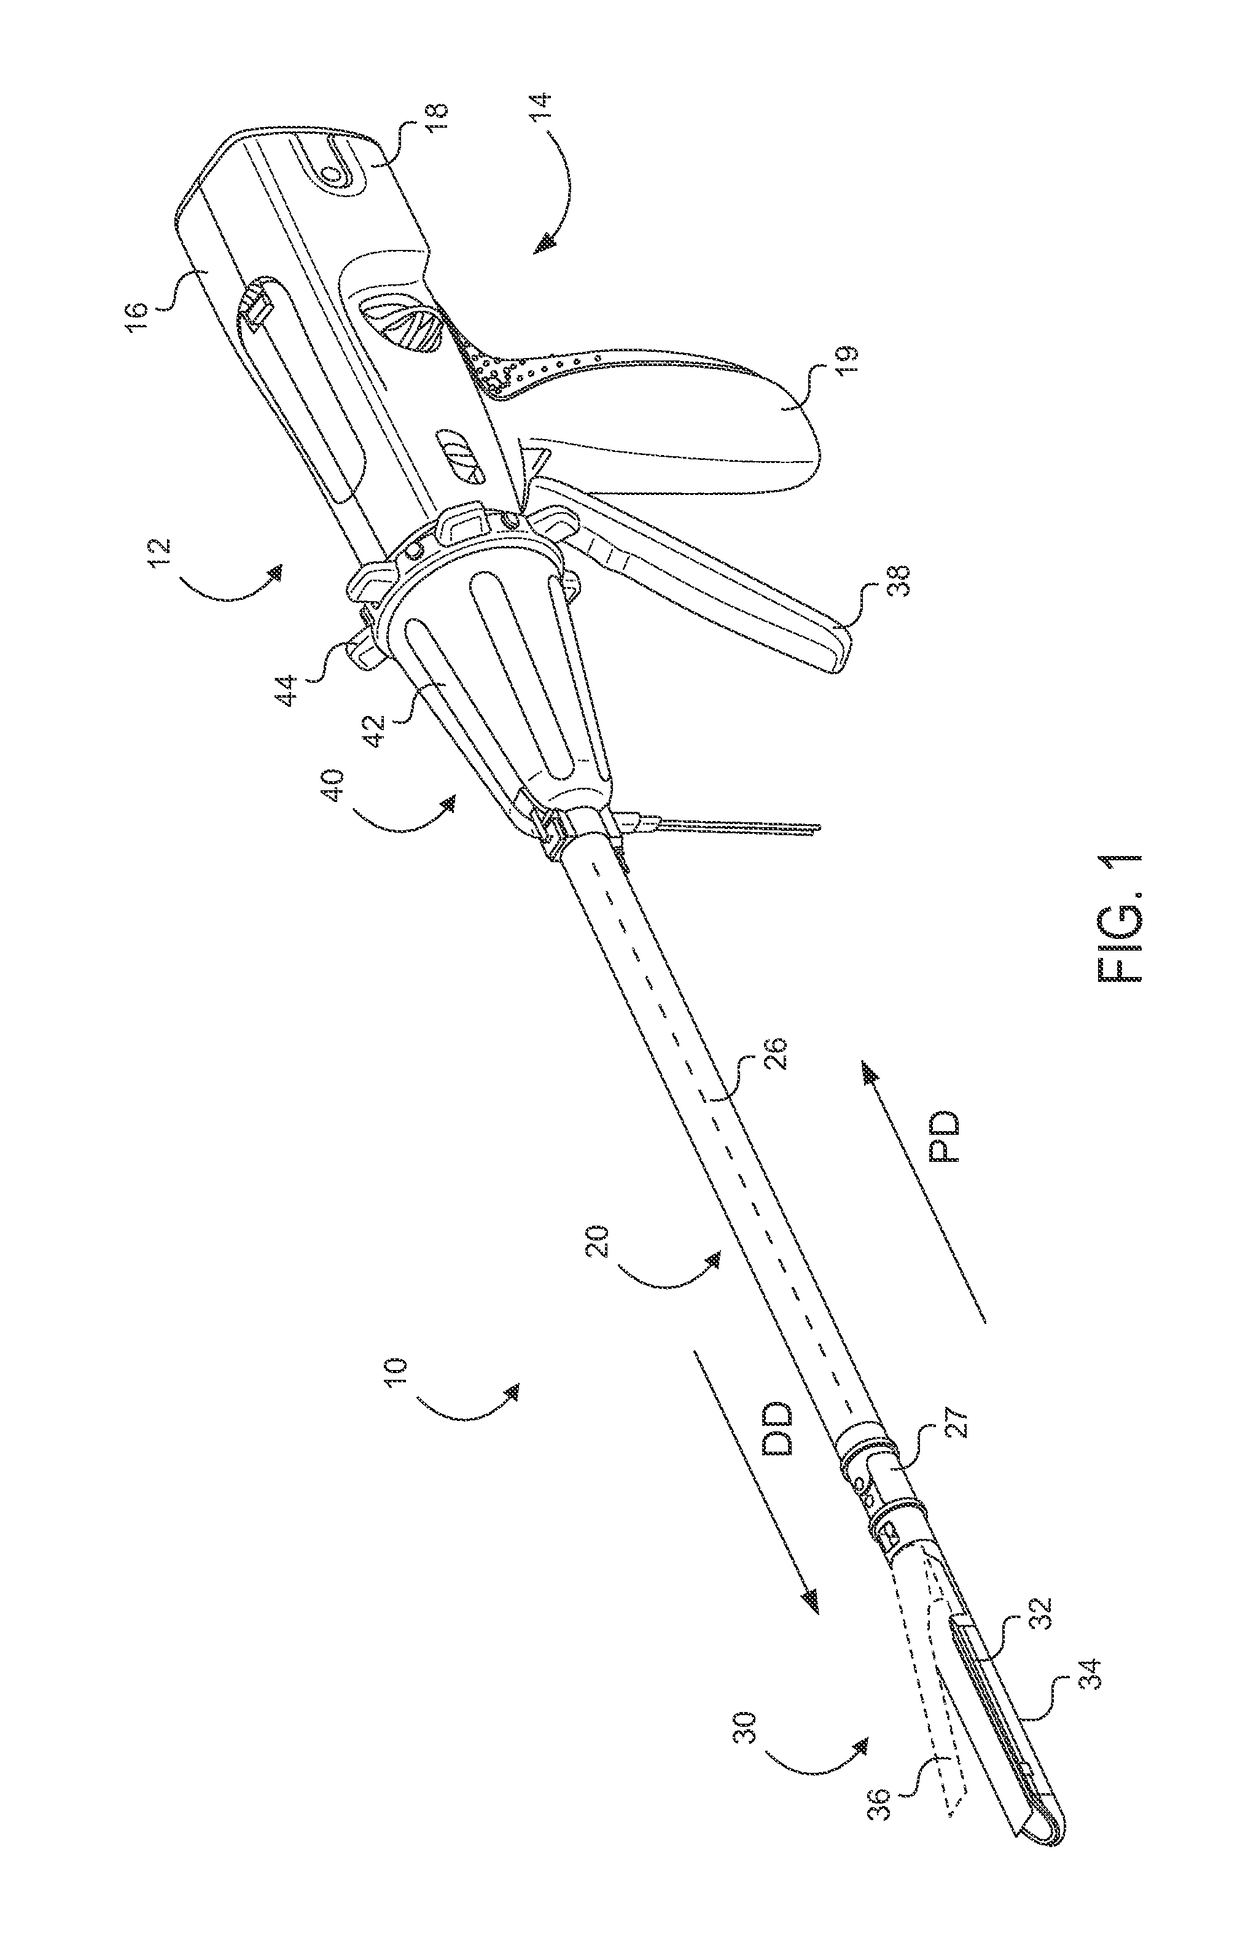 Electrode wiping surgical device